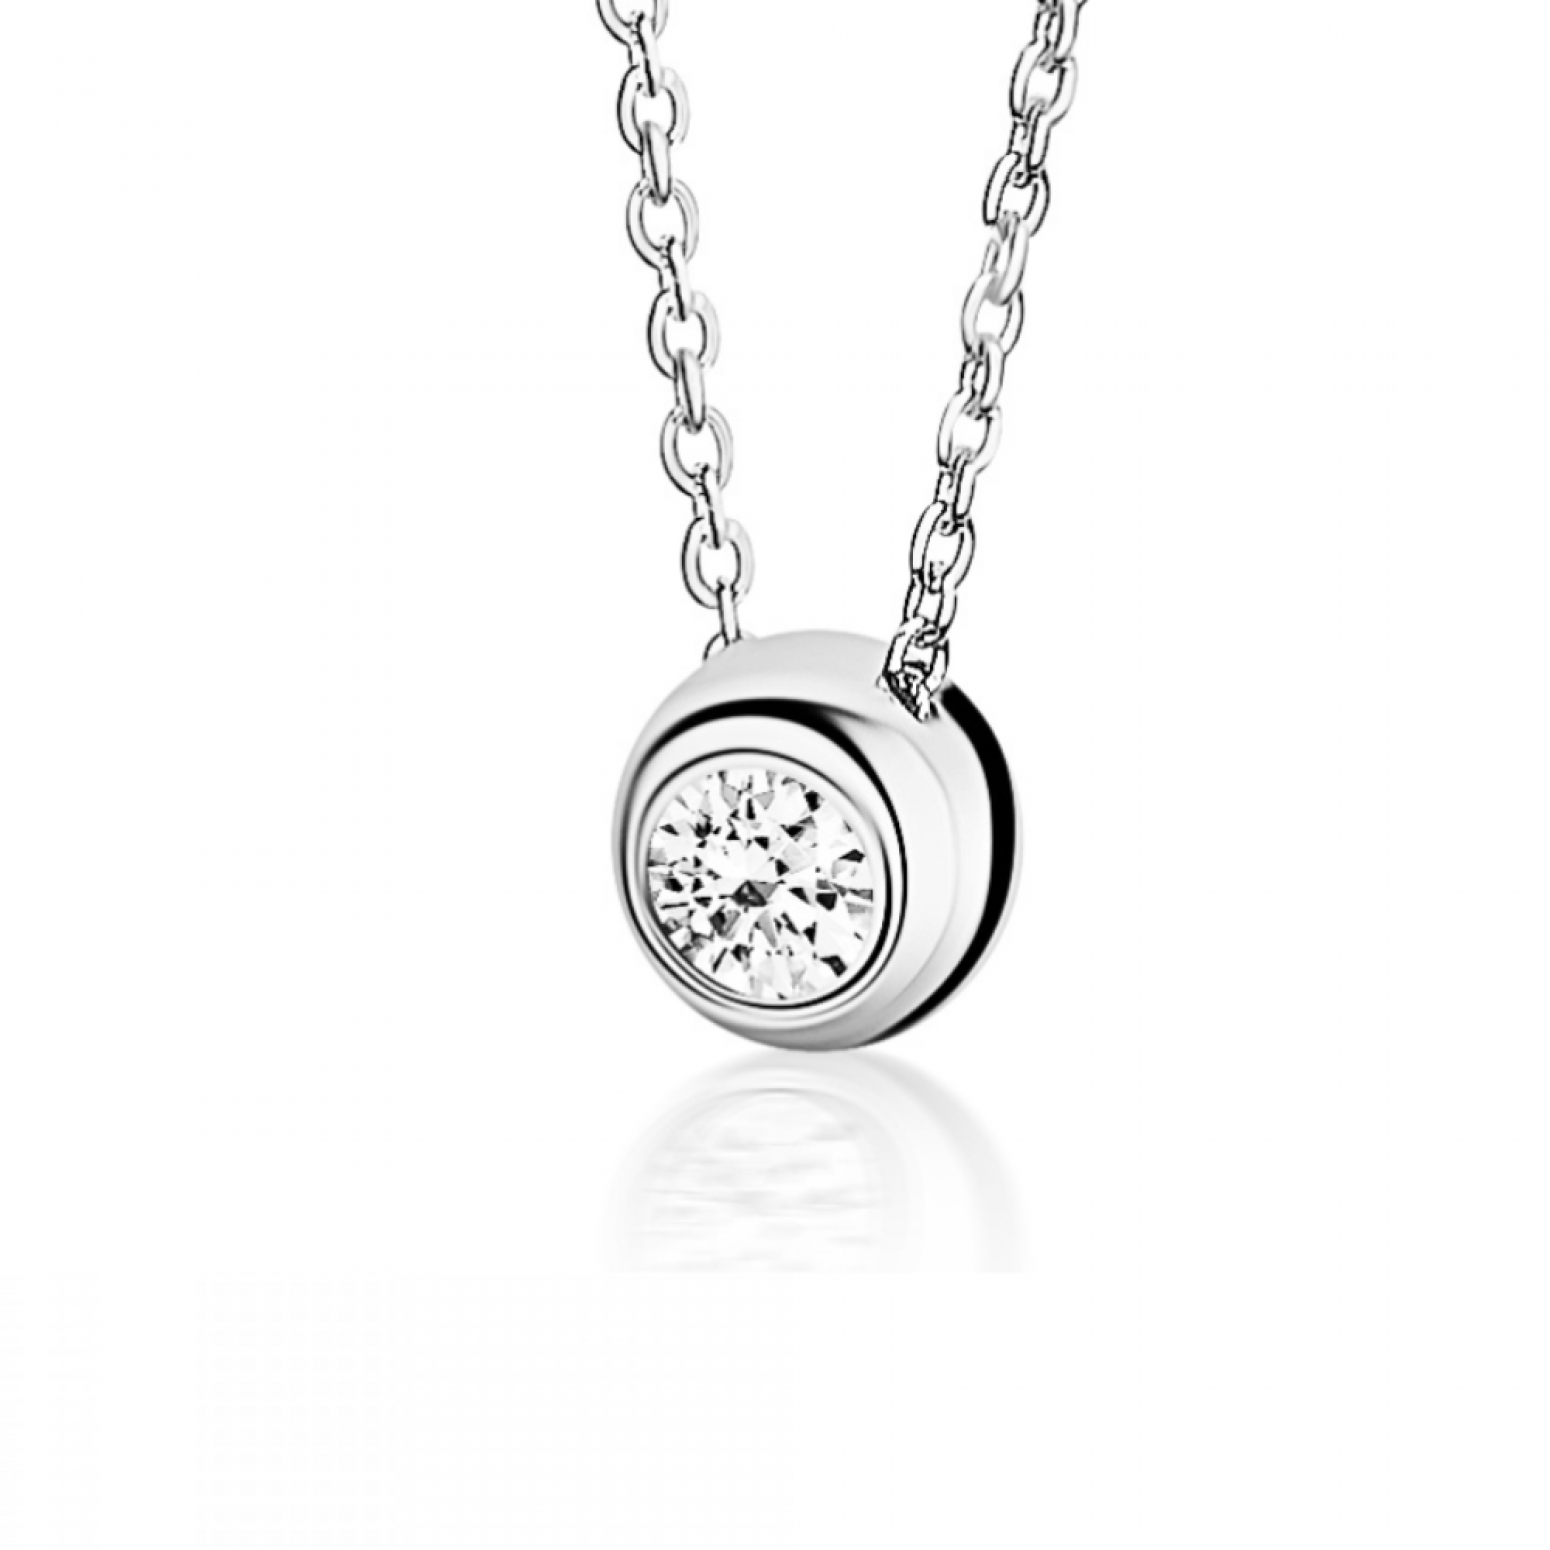 Solitaire necklace Κ18 white gold with diamond  0.20ct, VVS2, G from IGL ko4819 NECKLACES Κοσμηματα - chrilia.gr